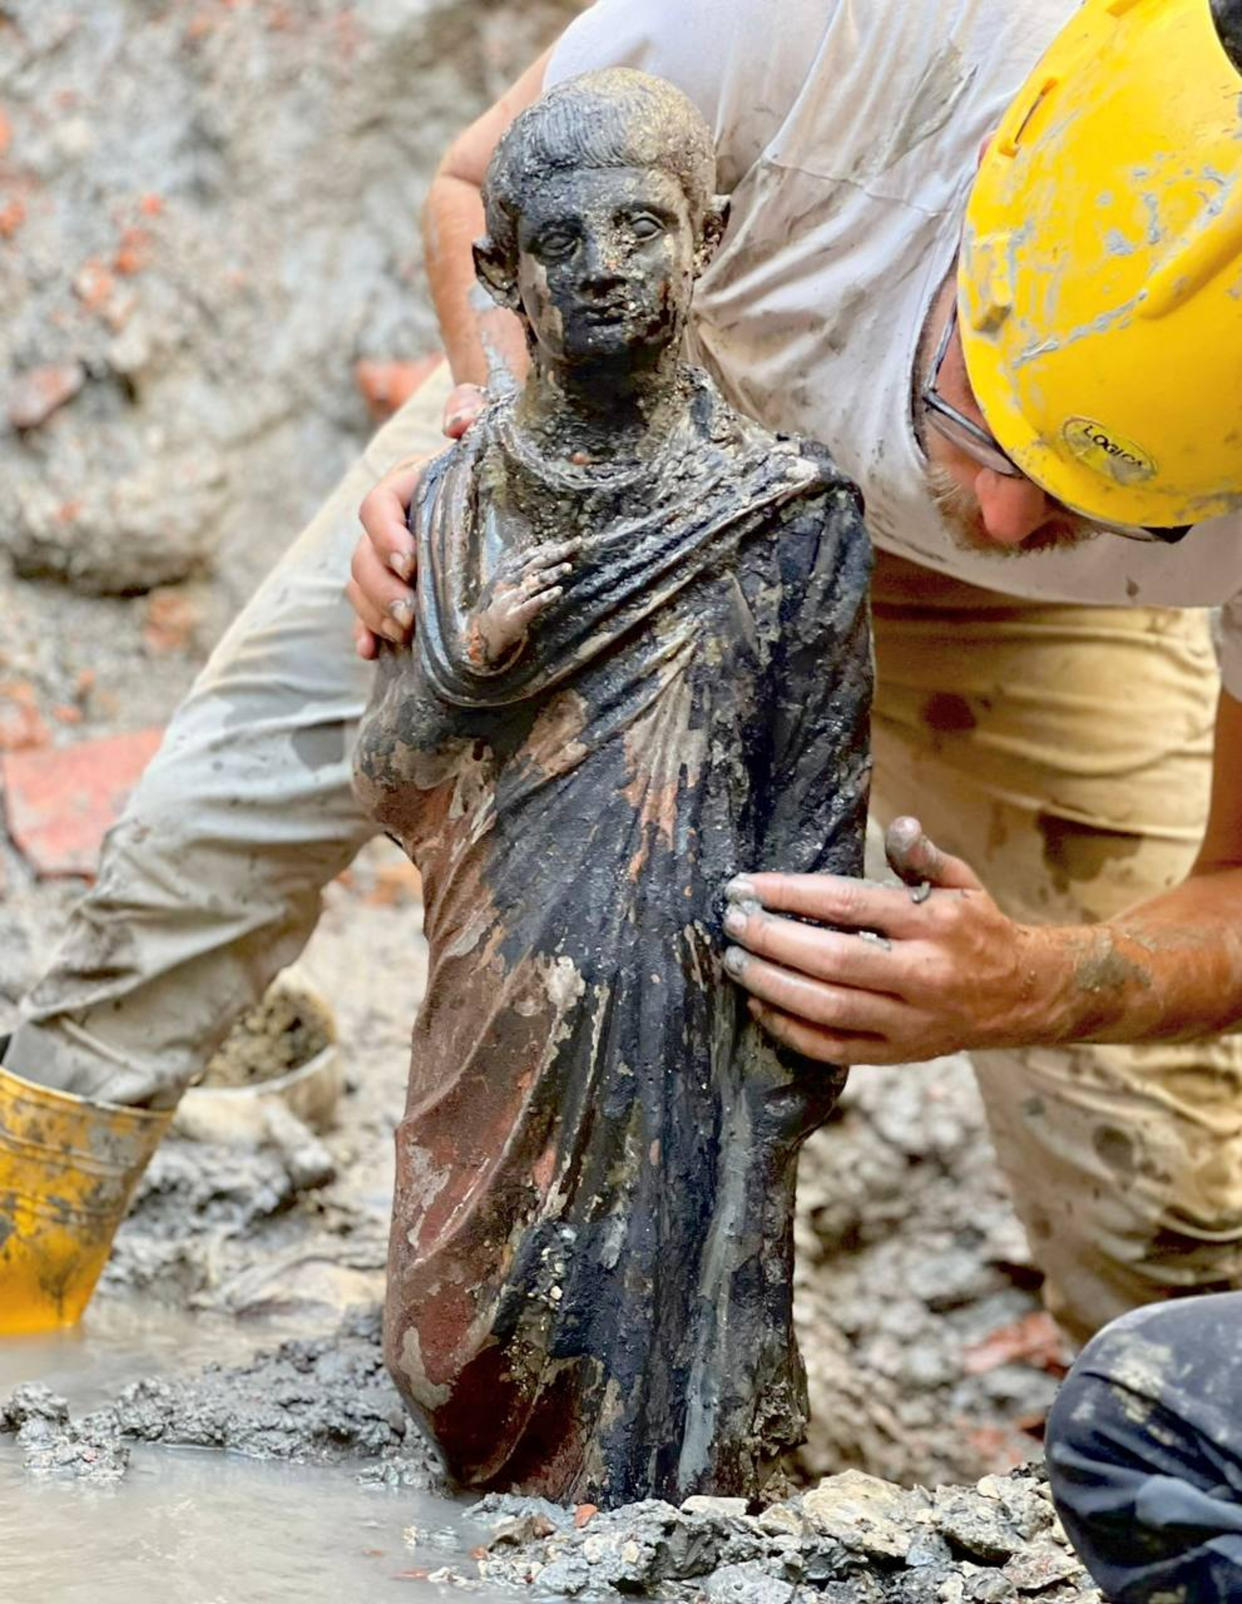 Archaeologists work at the site of the discovery of two dozen well-preserved bronze statues from an ancient Tuscan thermal spring in San Casciano dei Bagni, central Italy, in this update photo made available by the Italian Culture Ministry, Thursday, Nov. 3, 2022. (Italian Culture Ministry via AP)